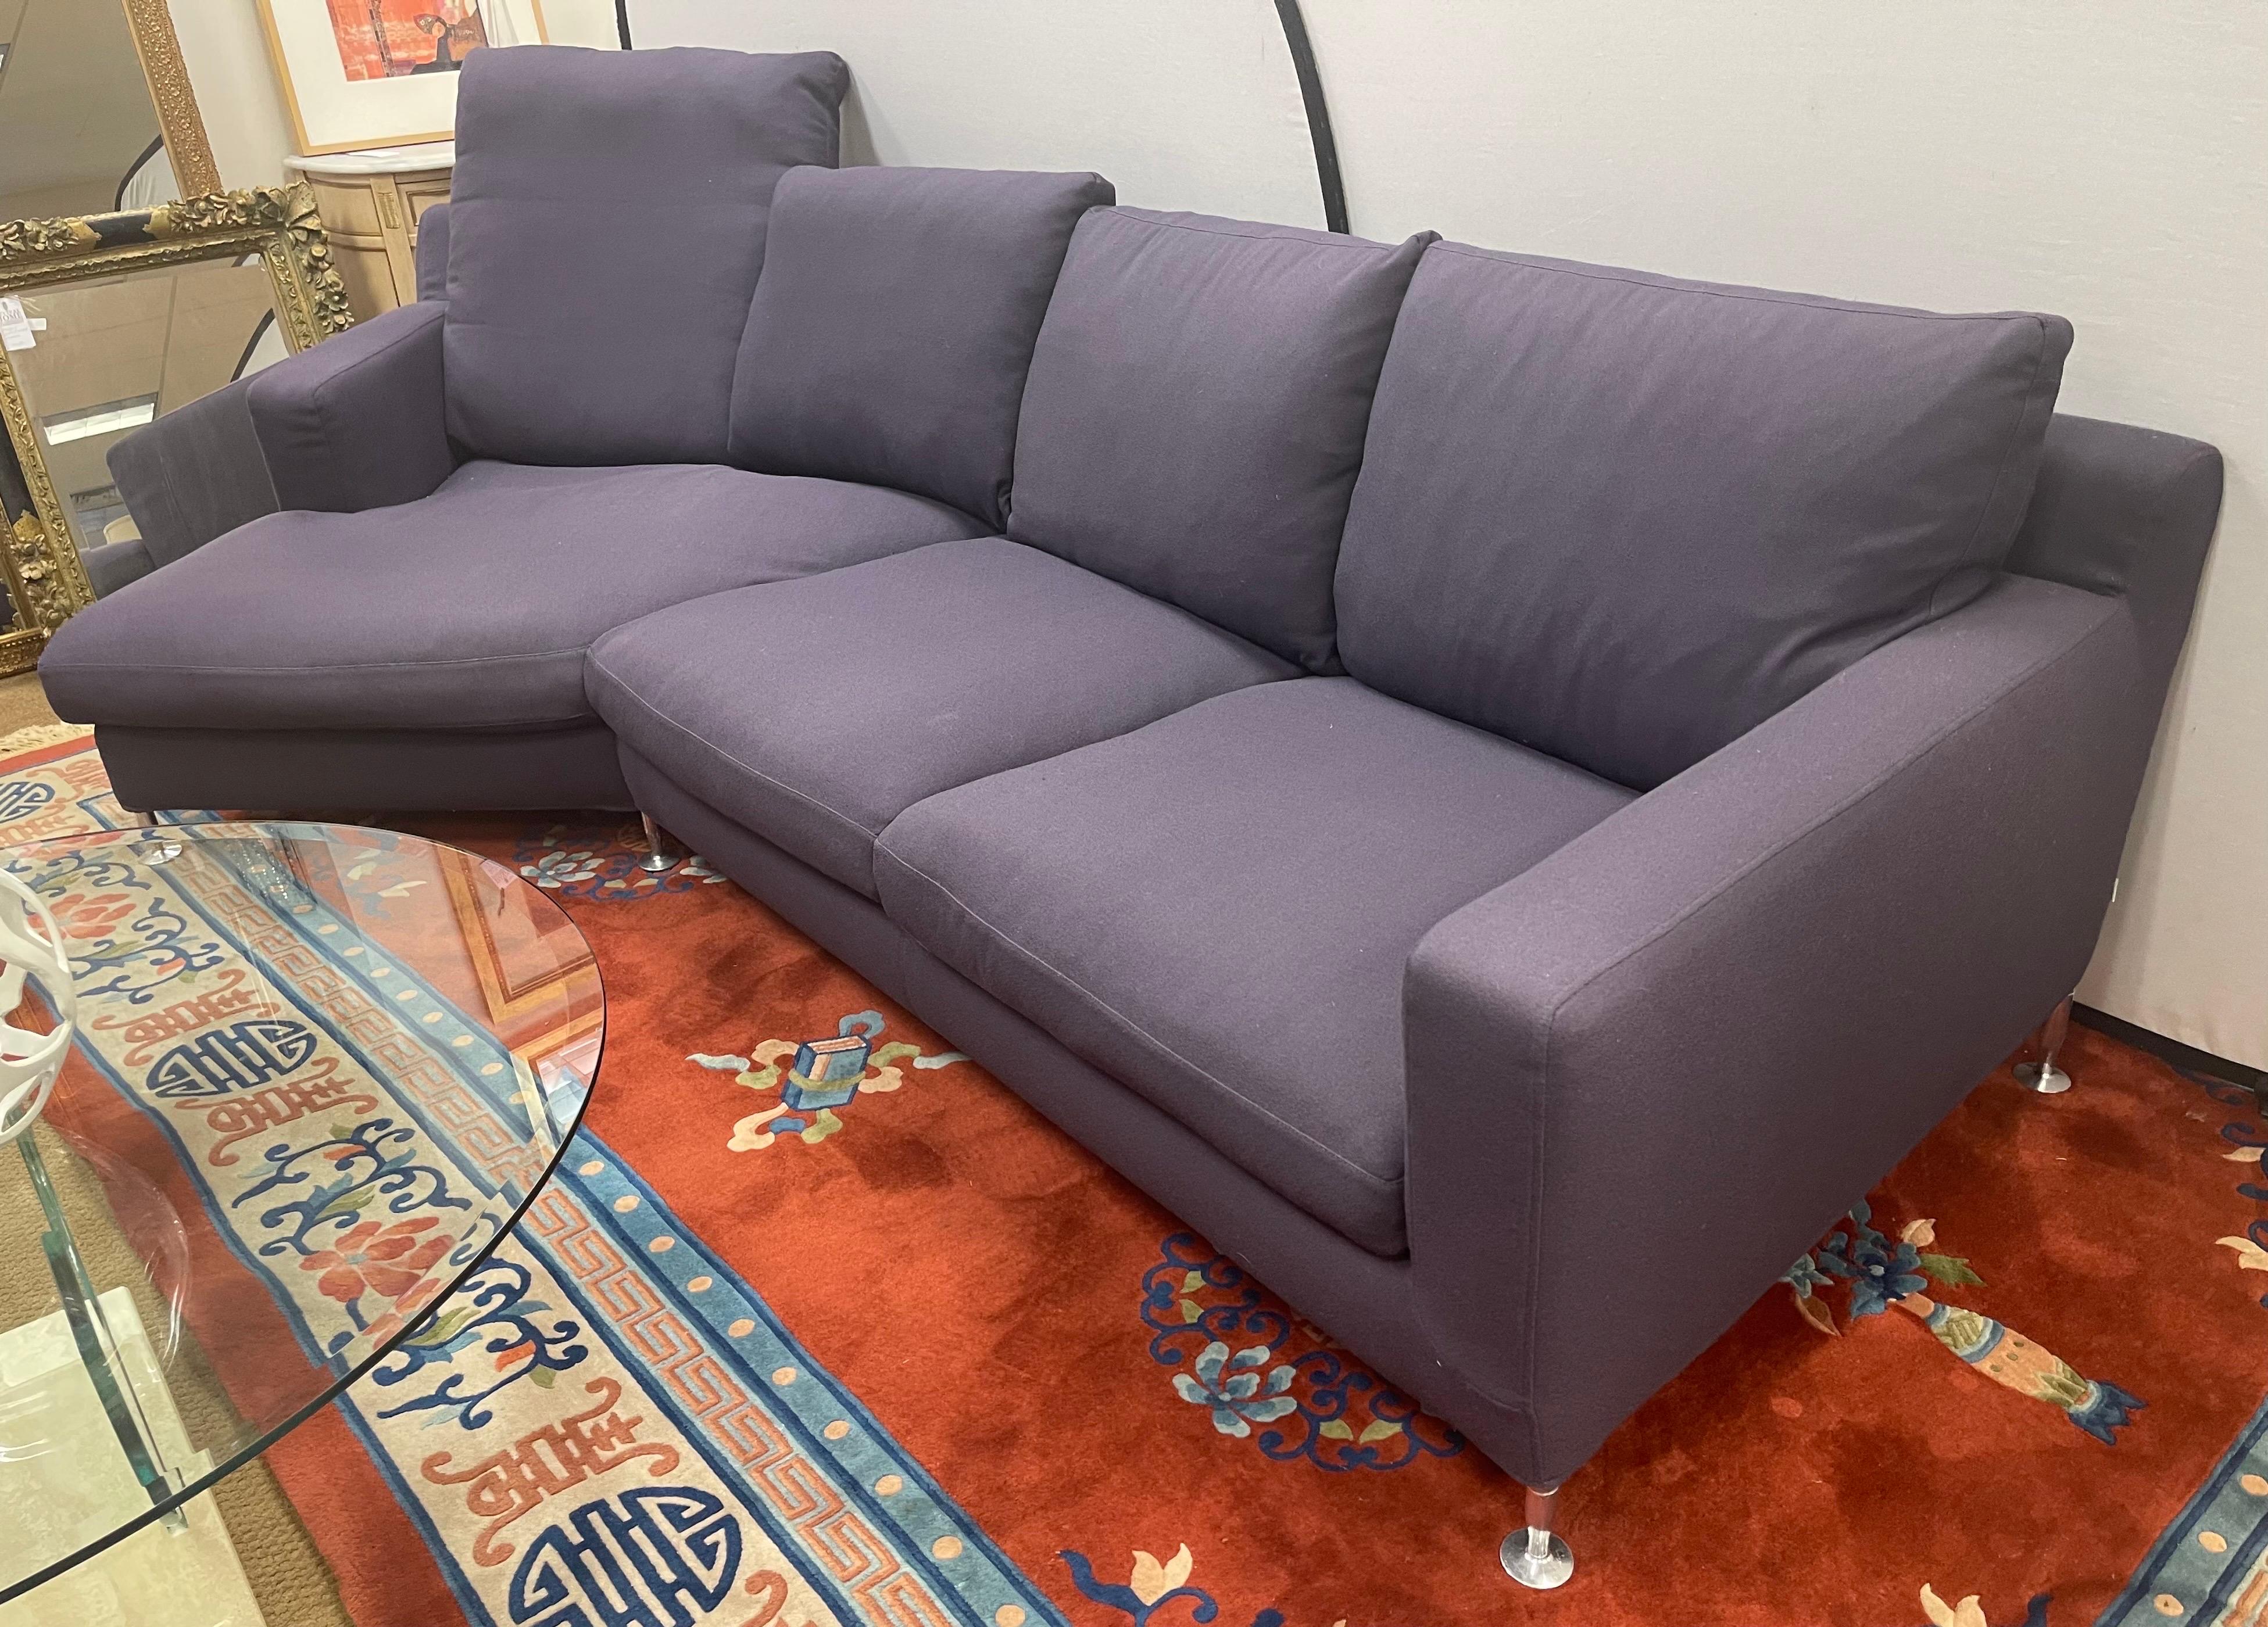 The Harry two piece sectional sofa from B&B Italia, made in Italy and designed by the great Antonio Citterio. Why not own an iconic piece of design history. Measures 10 feet wide and all dimension are above. The chaise depth is 55